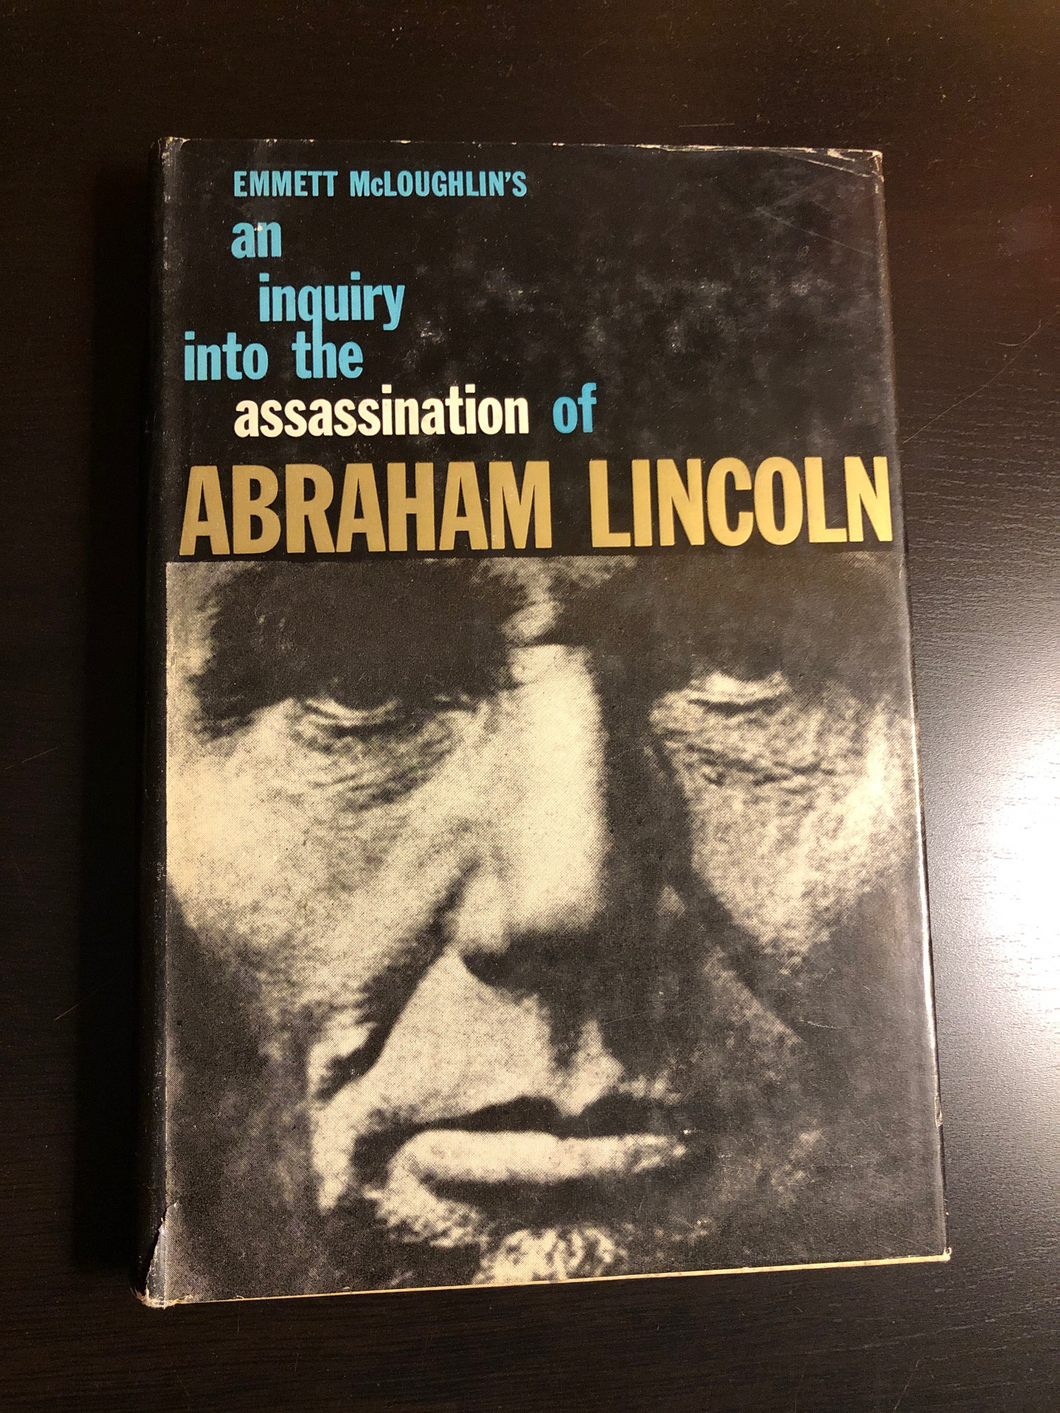 An Inquiry into the Assassination of Abraham Lincoln